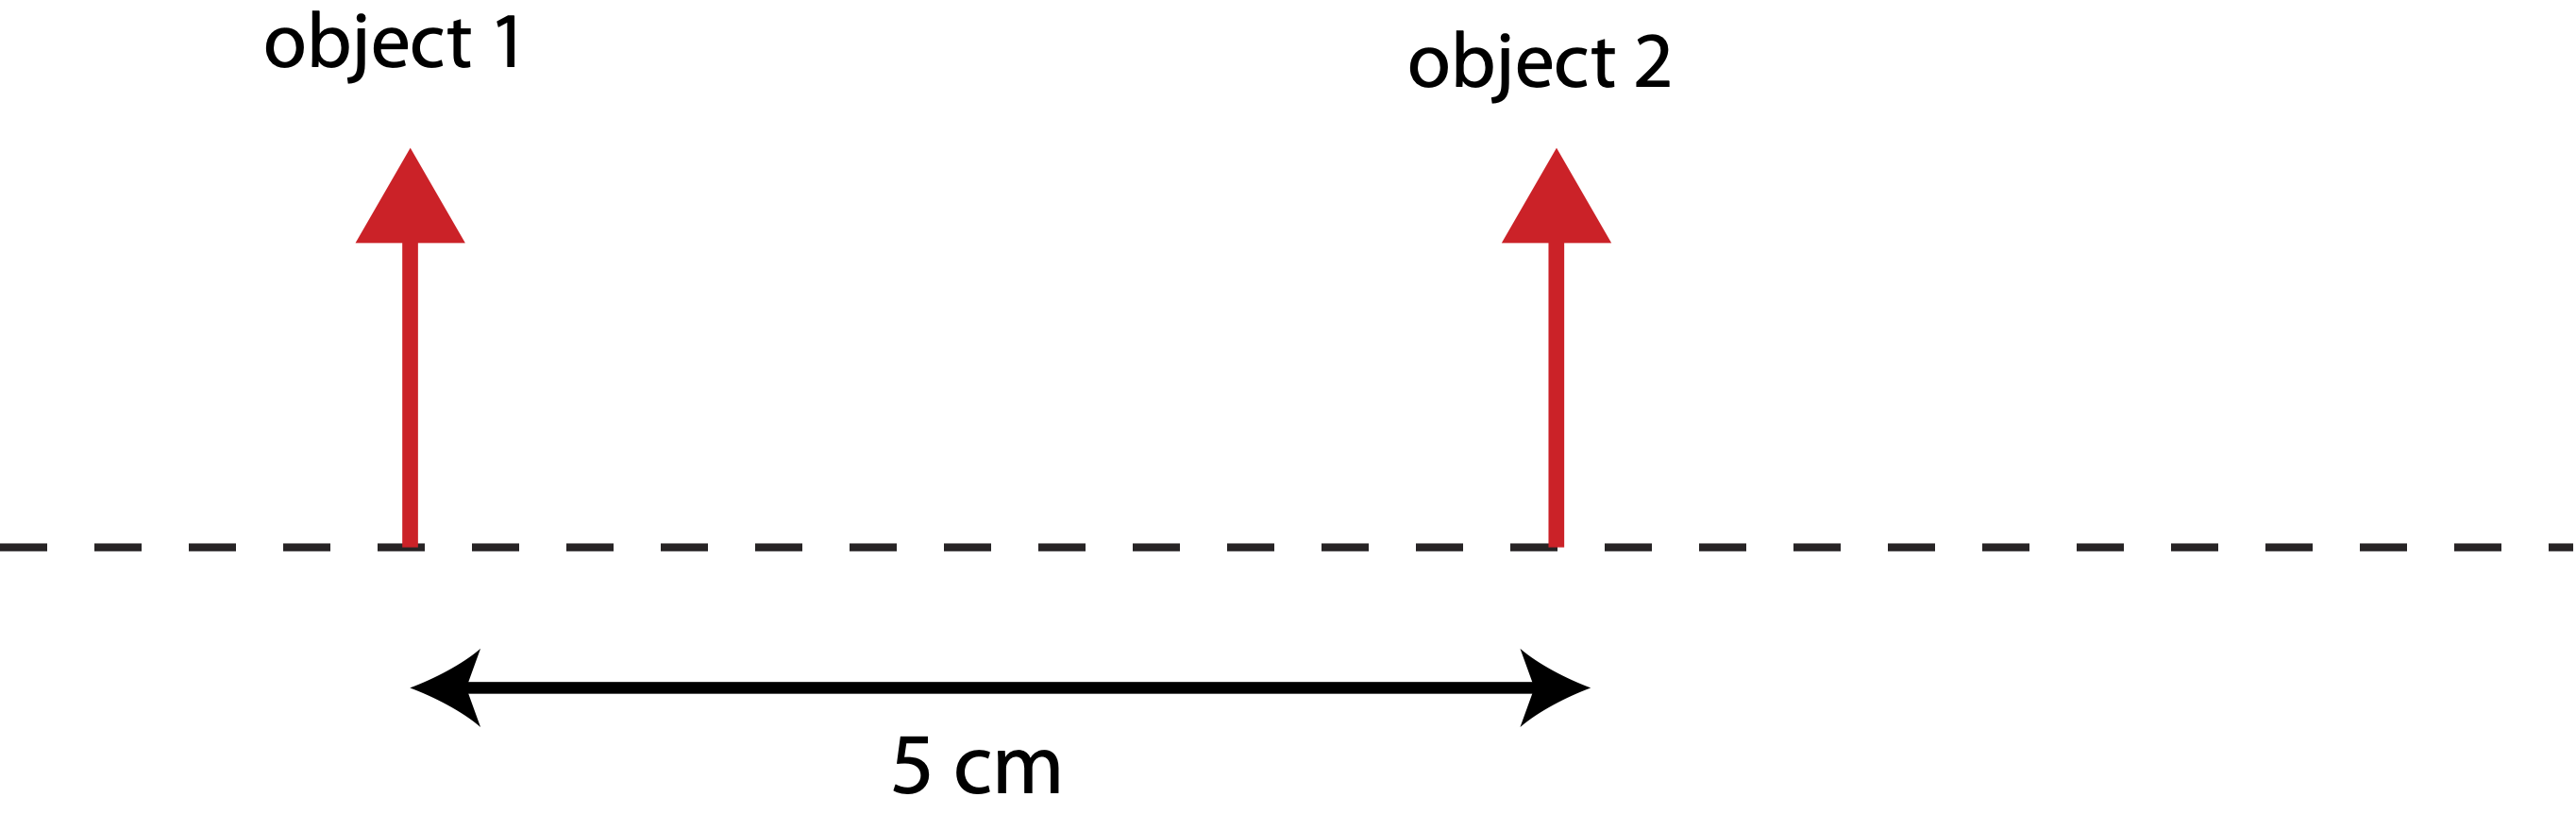 11-5-Ex2-two-objects.png